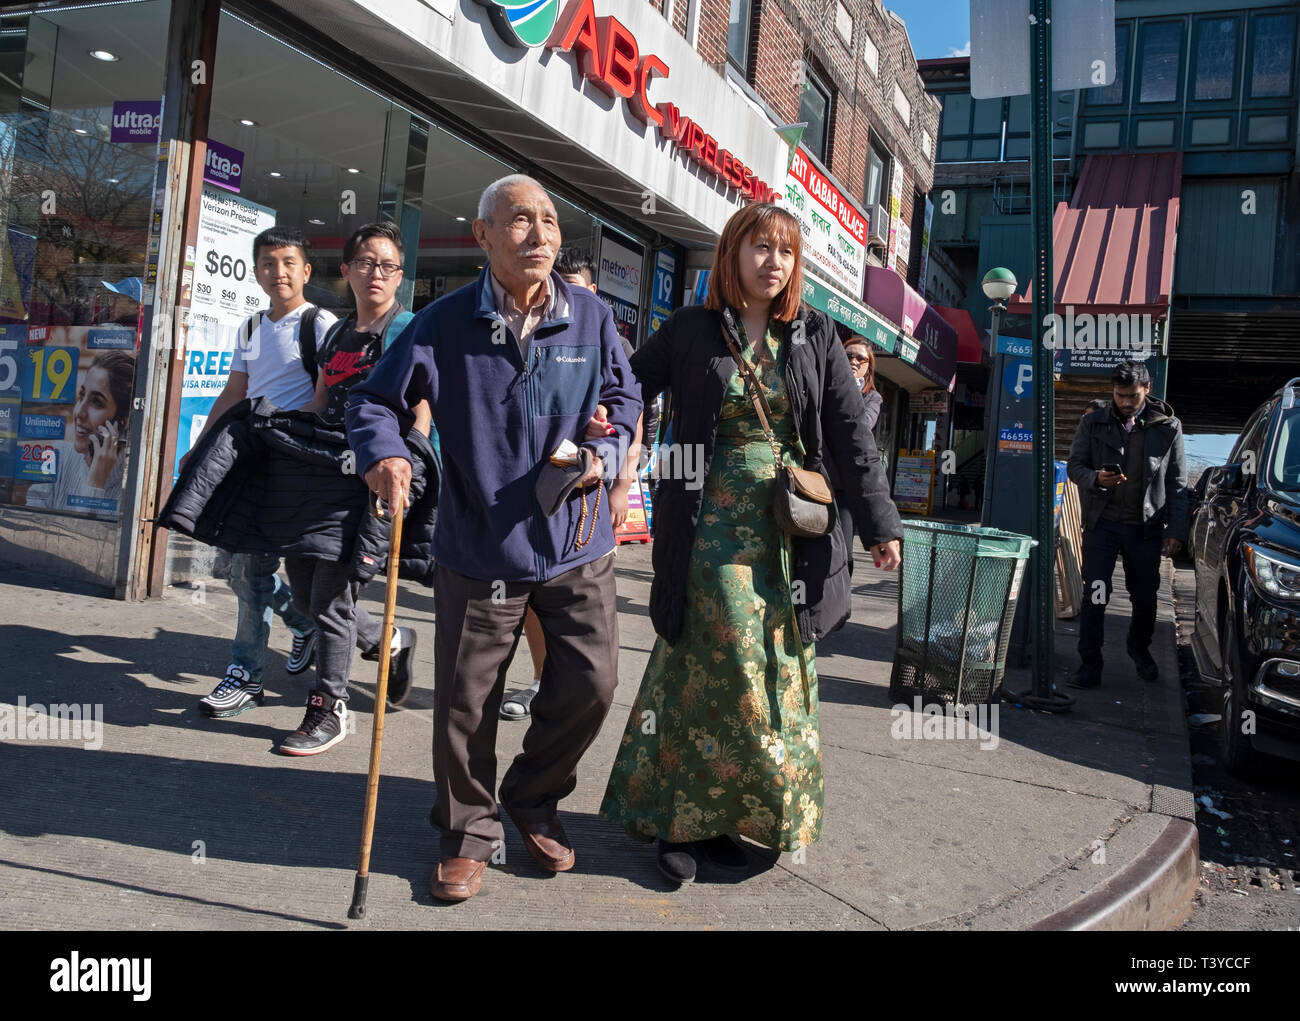 A young Asian woman walks arm in arm with an older man, presumably her grandfather. On 74th St. in Jackson Heights, Queens, New York City. Stock Photo